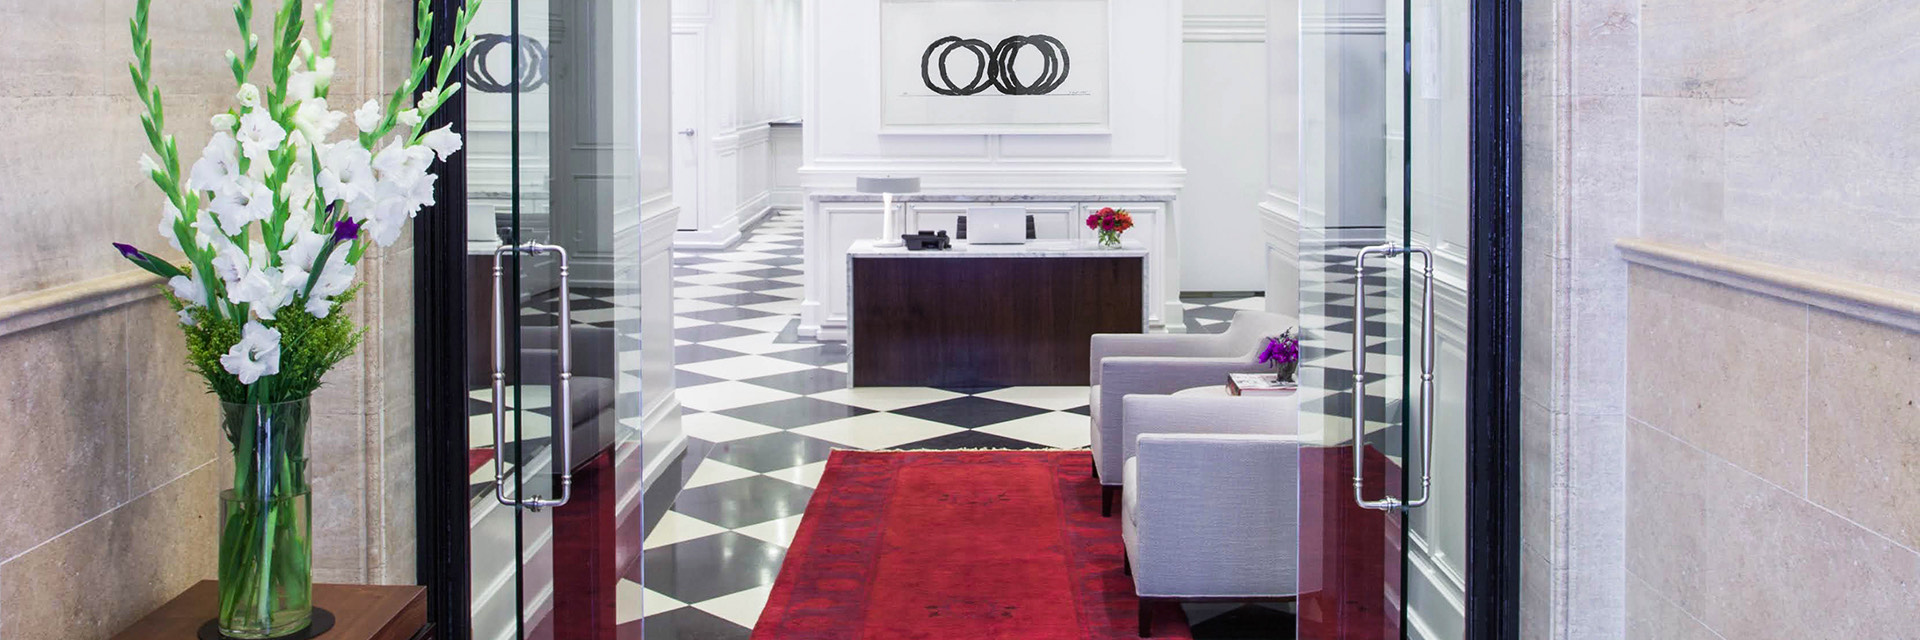 Quaint lobby with checkerboard tiles